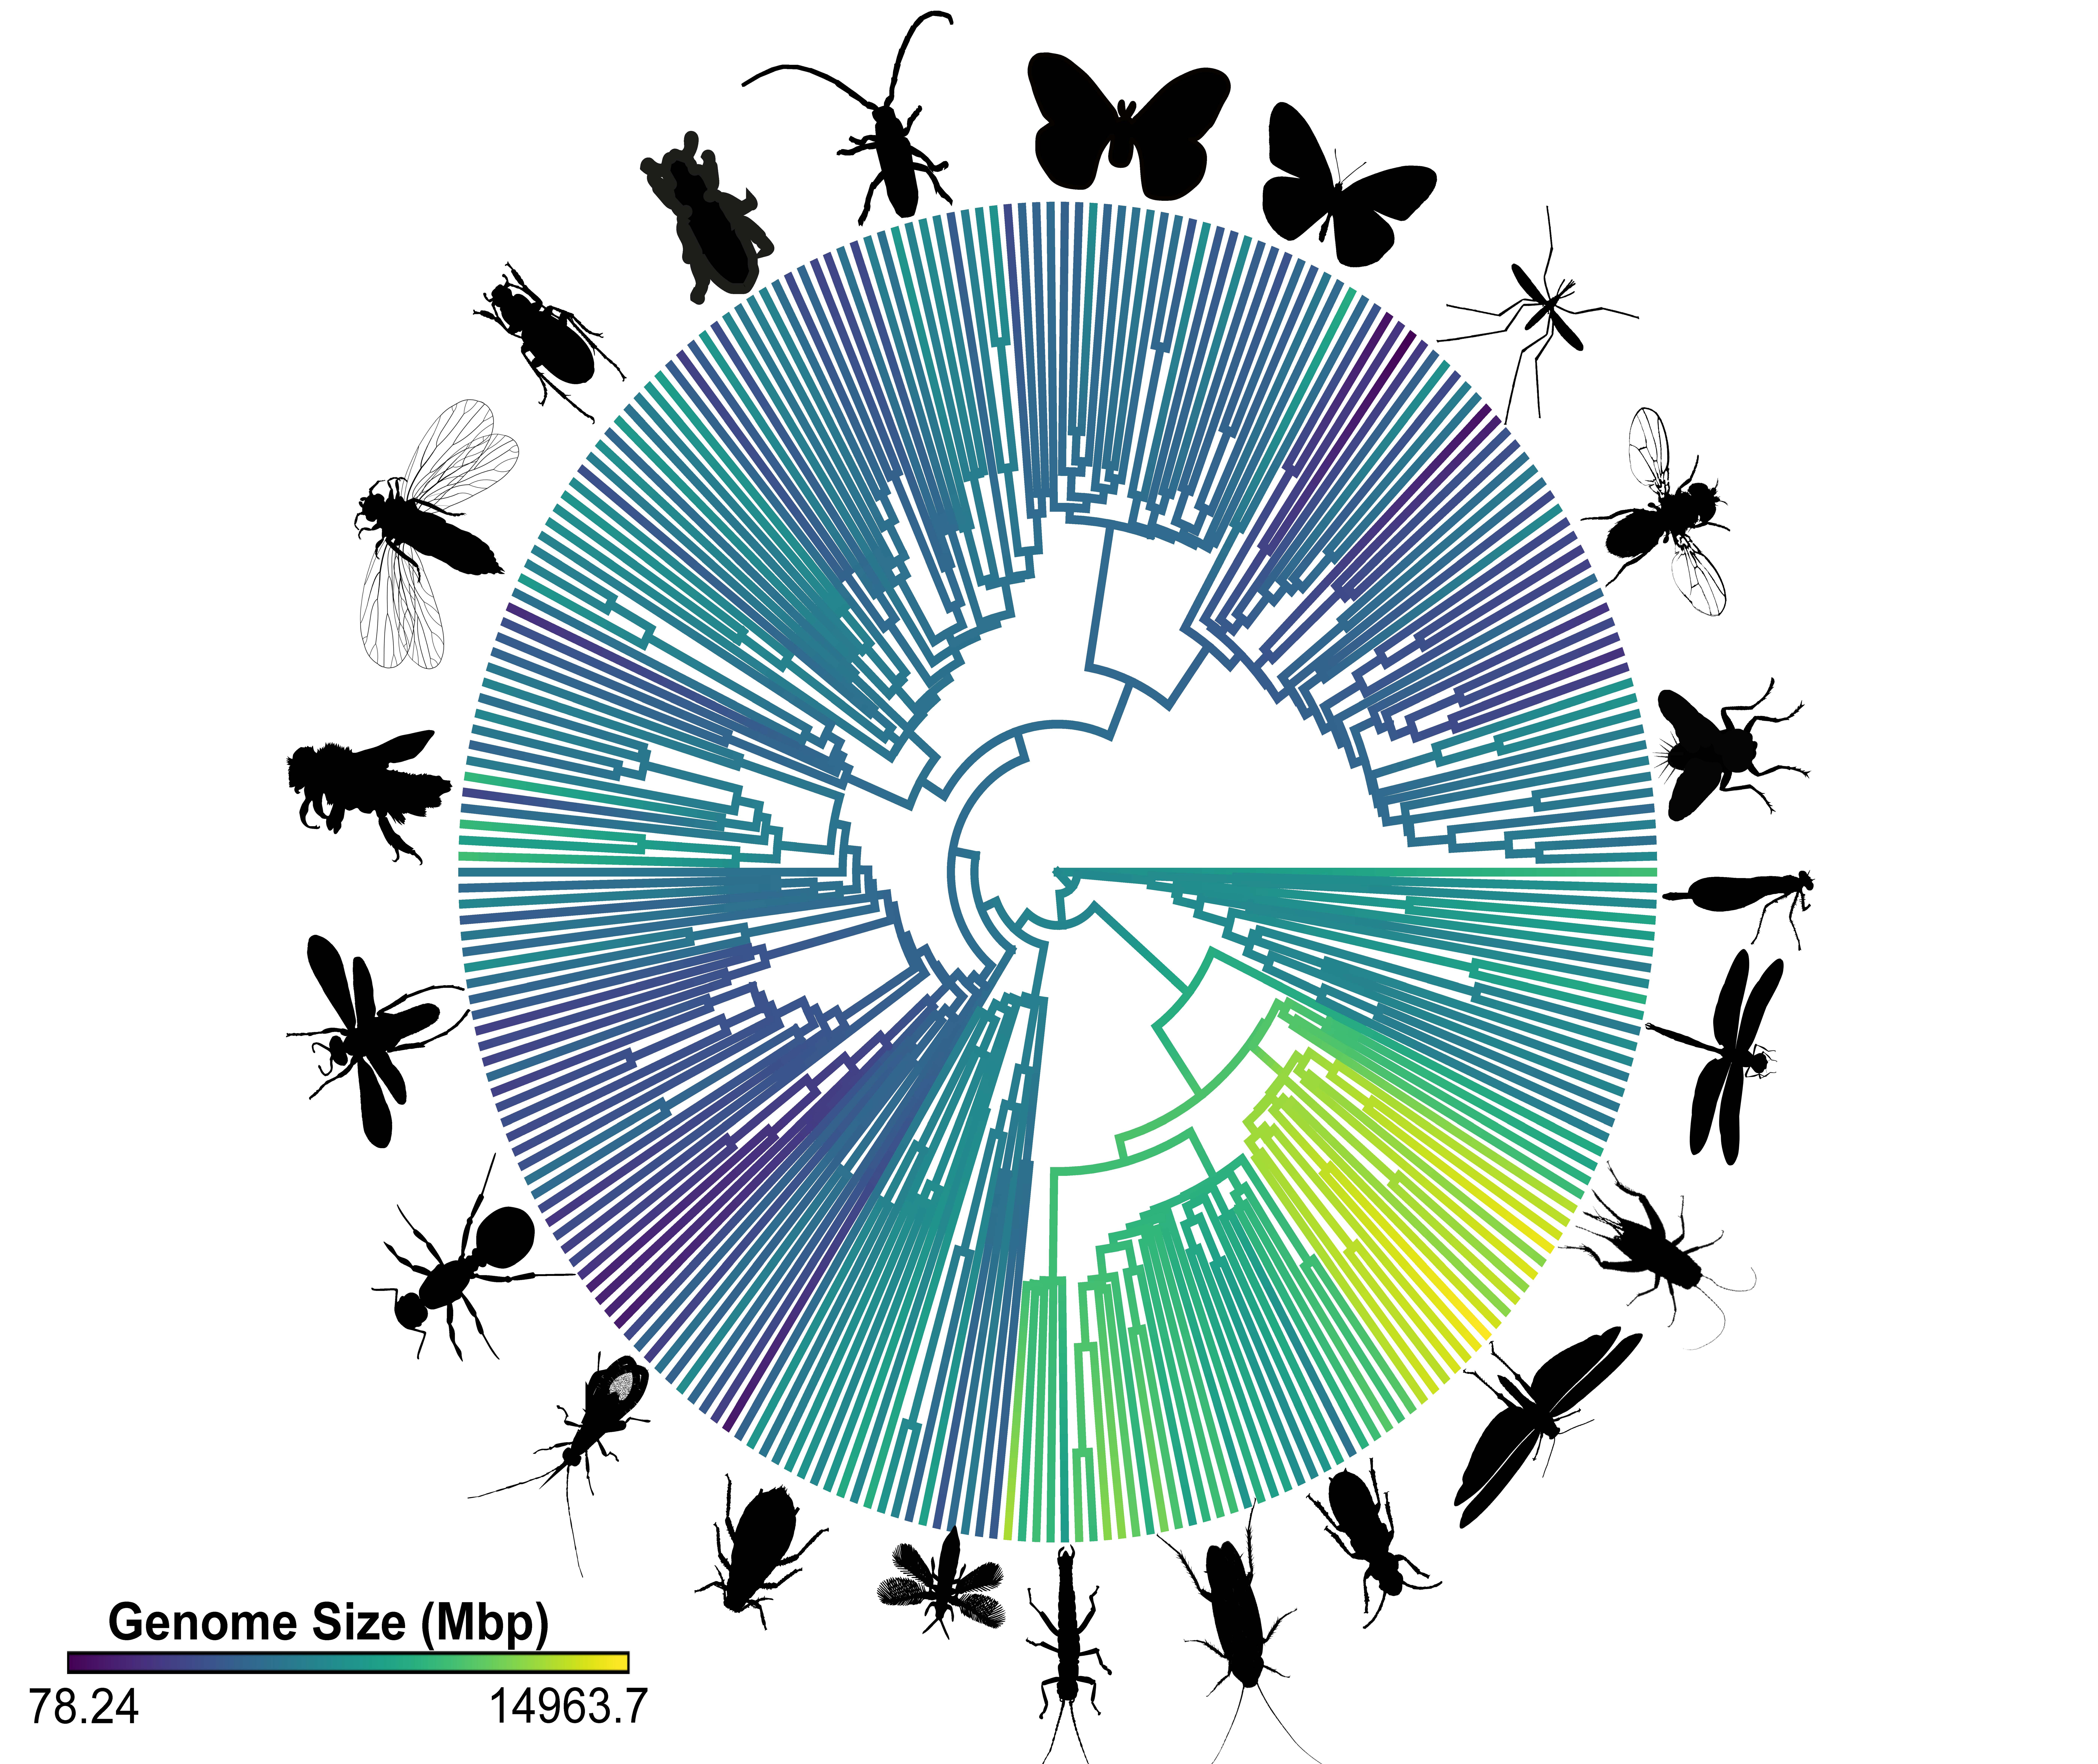 color_phylogeny_of_insect_genome_size